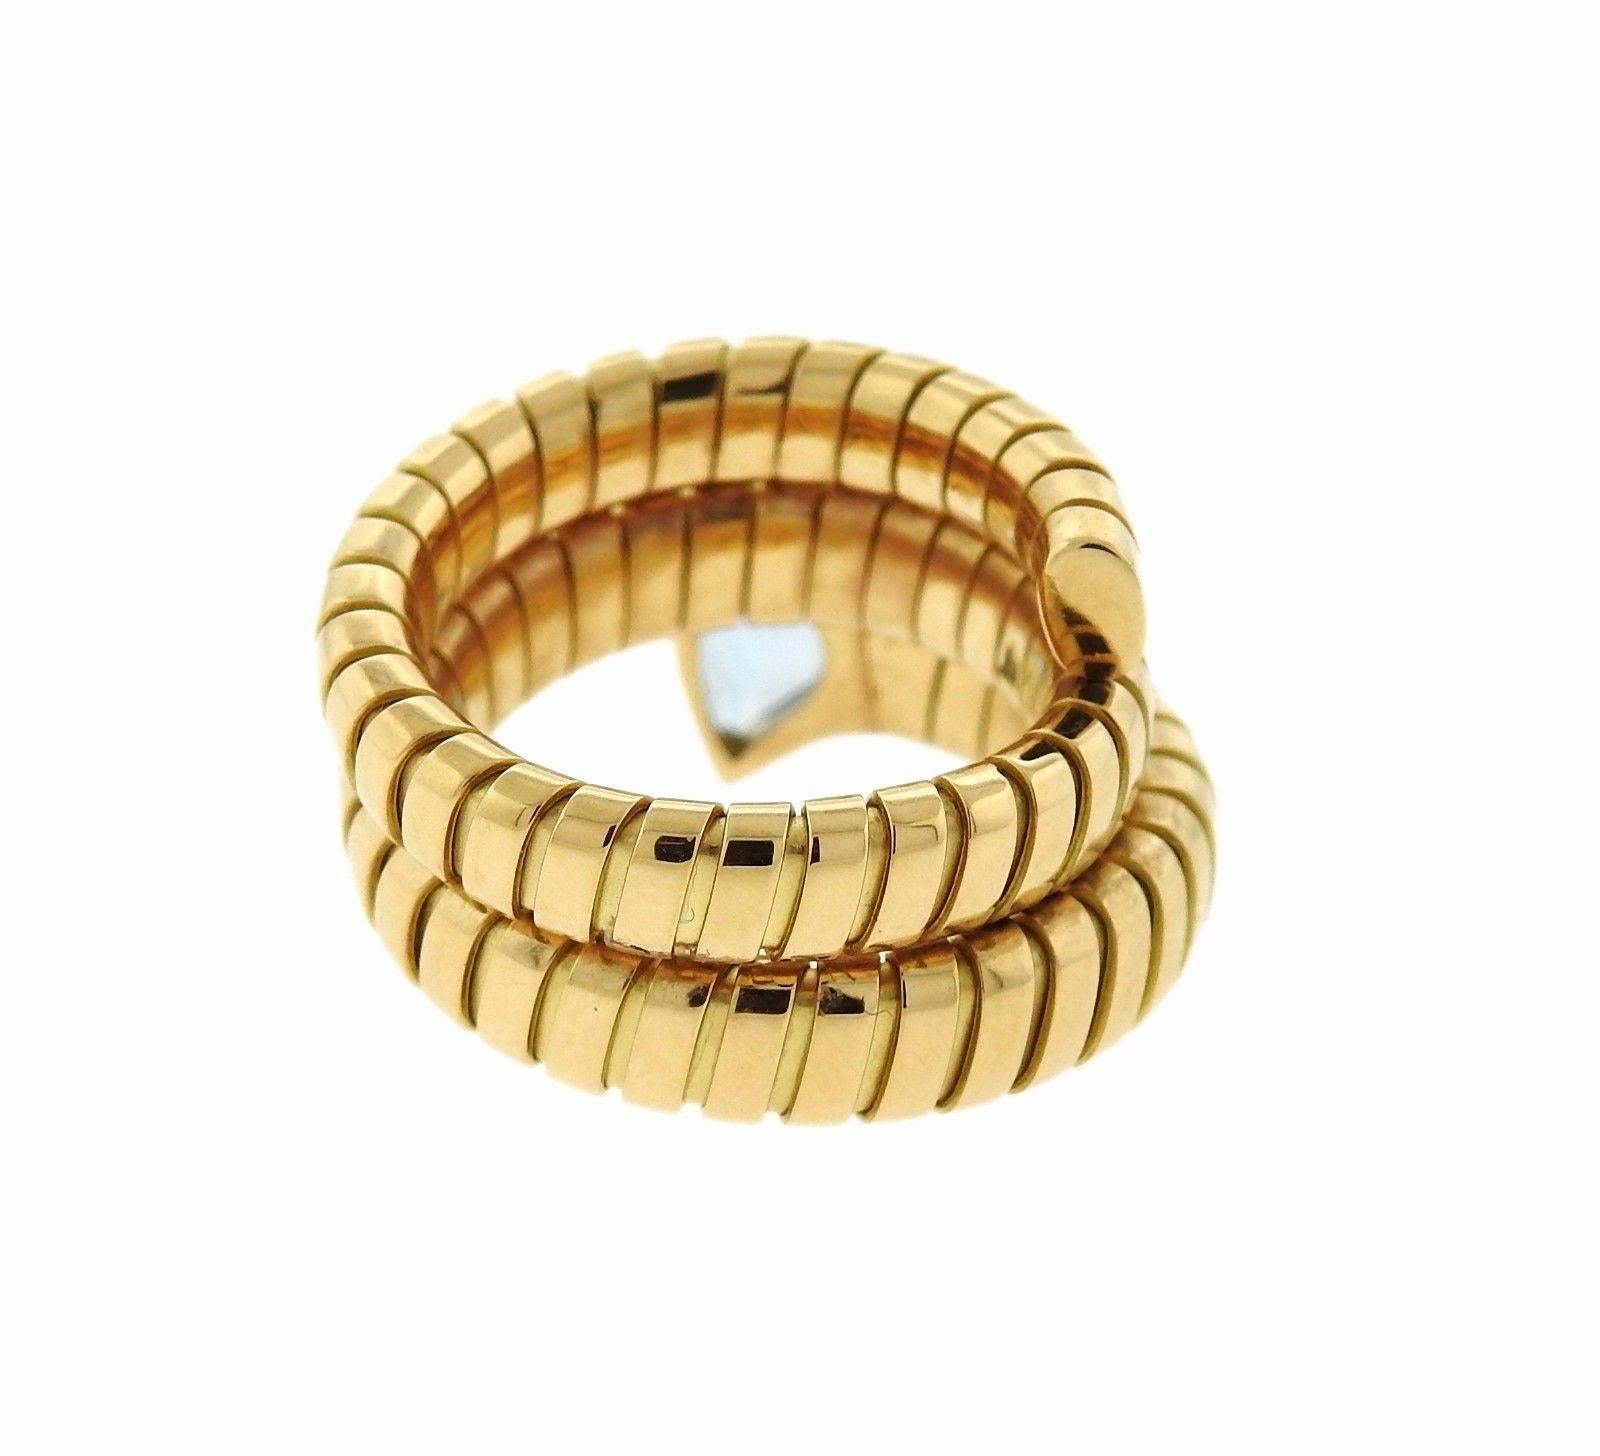 18k gold wrap ring, crafted by Bulgari for Tubogas collection, set with aquamarine gemstone. Ring size - 7 (slightly flexible)  ring top is 17mm wide. Marked: 10 MI, 750, Bvlgari . Weight: 14.4 grams
Retail $6750